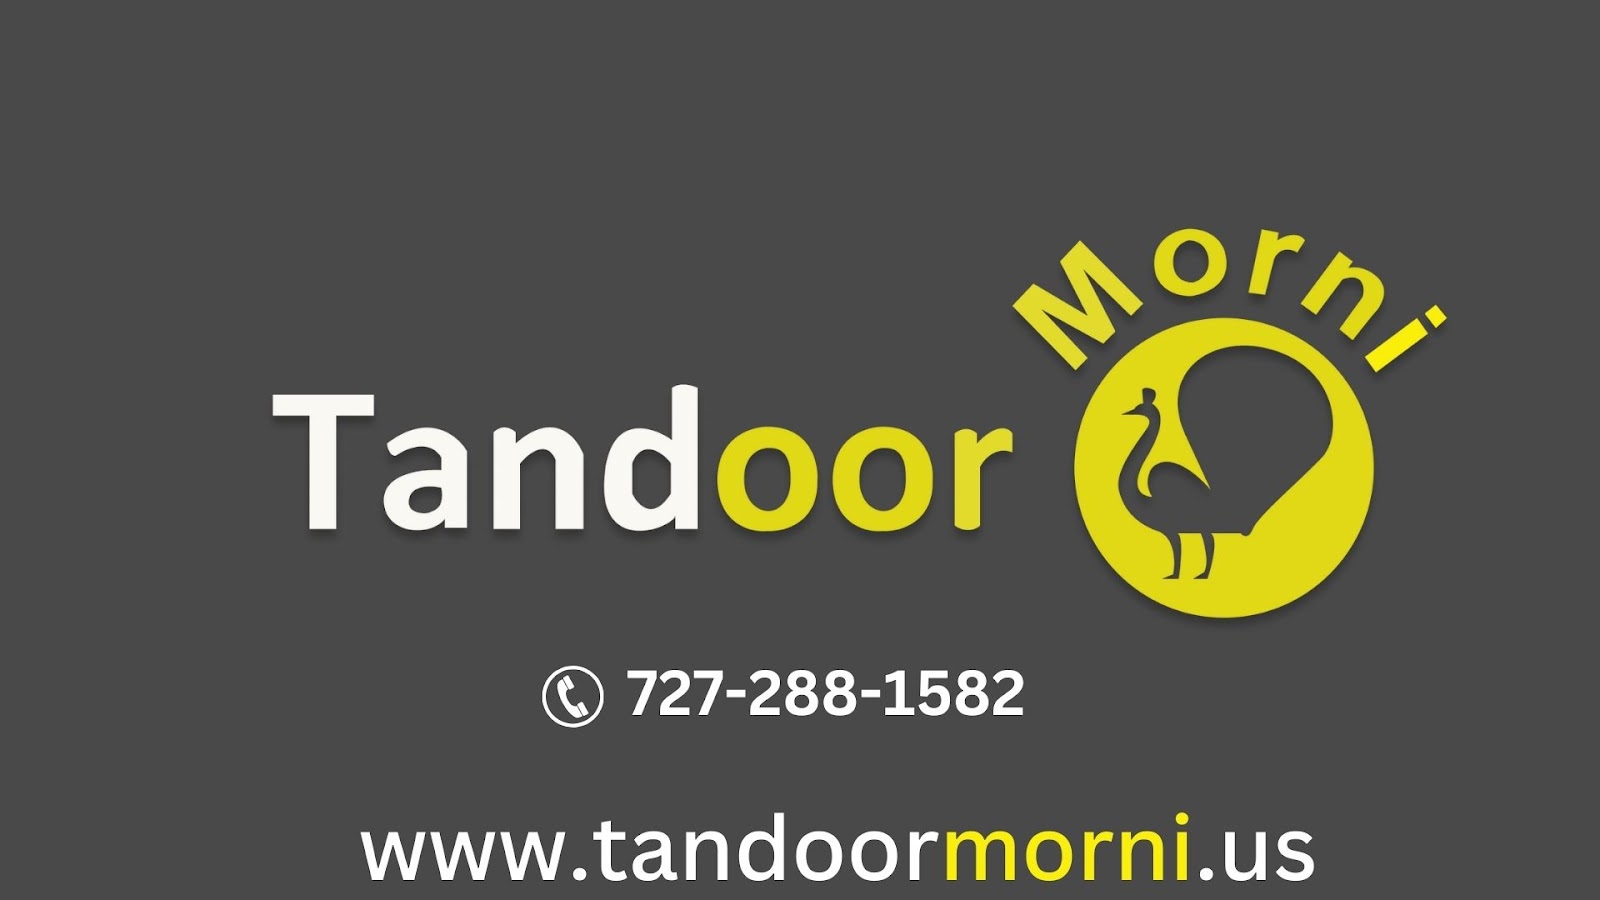 Order from Morni Tandoor for the greatest tandoor on the market, and don't be afraid to call us with any questions.